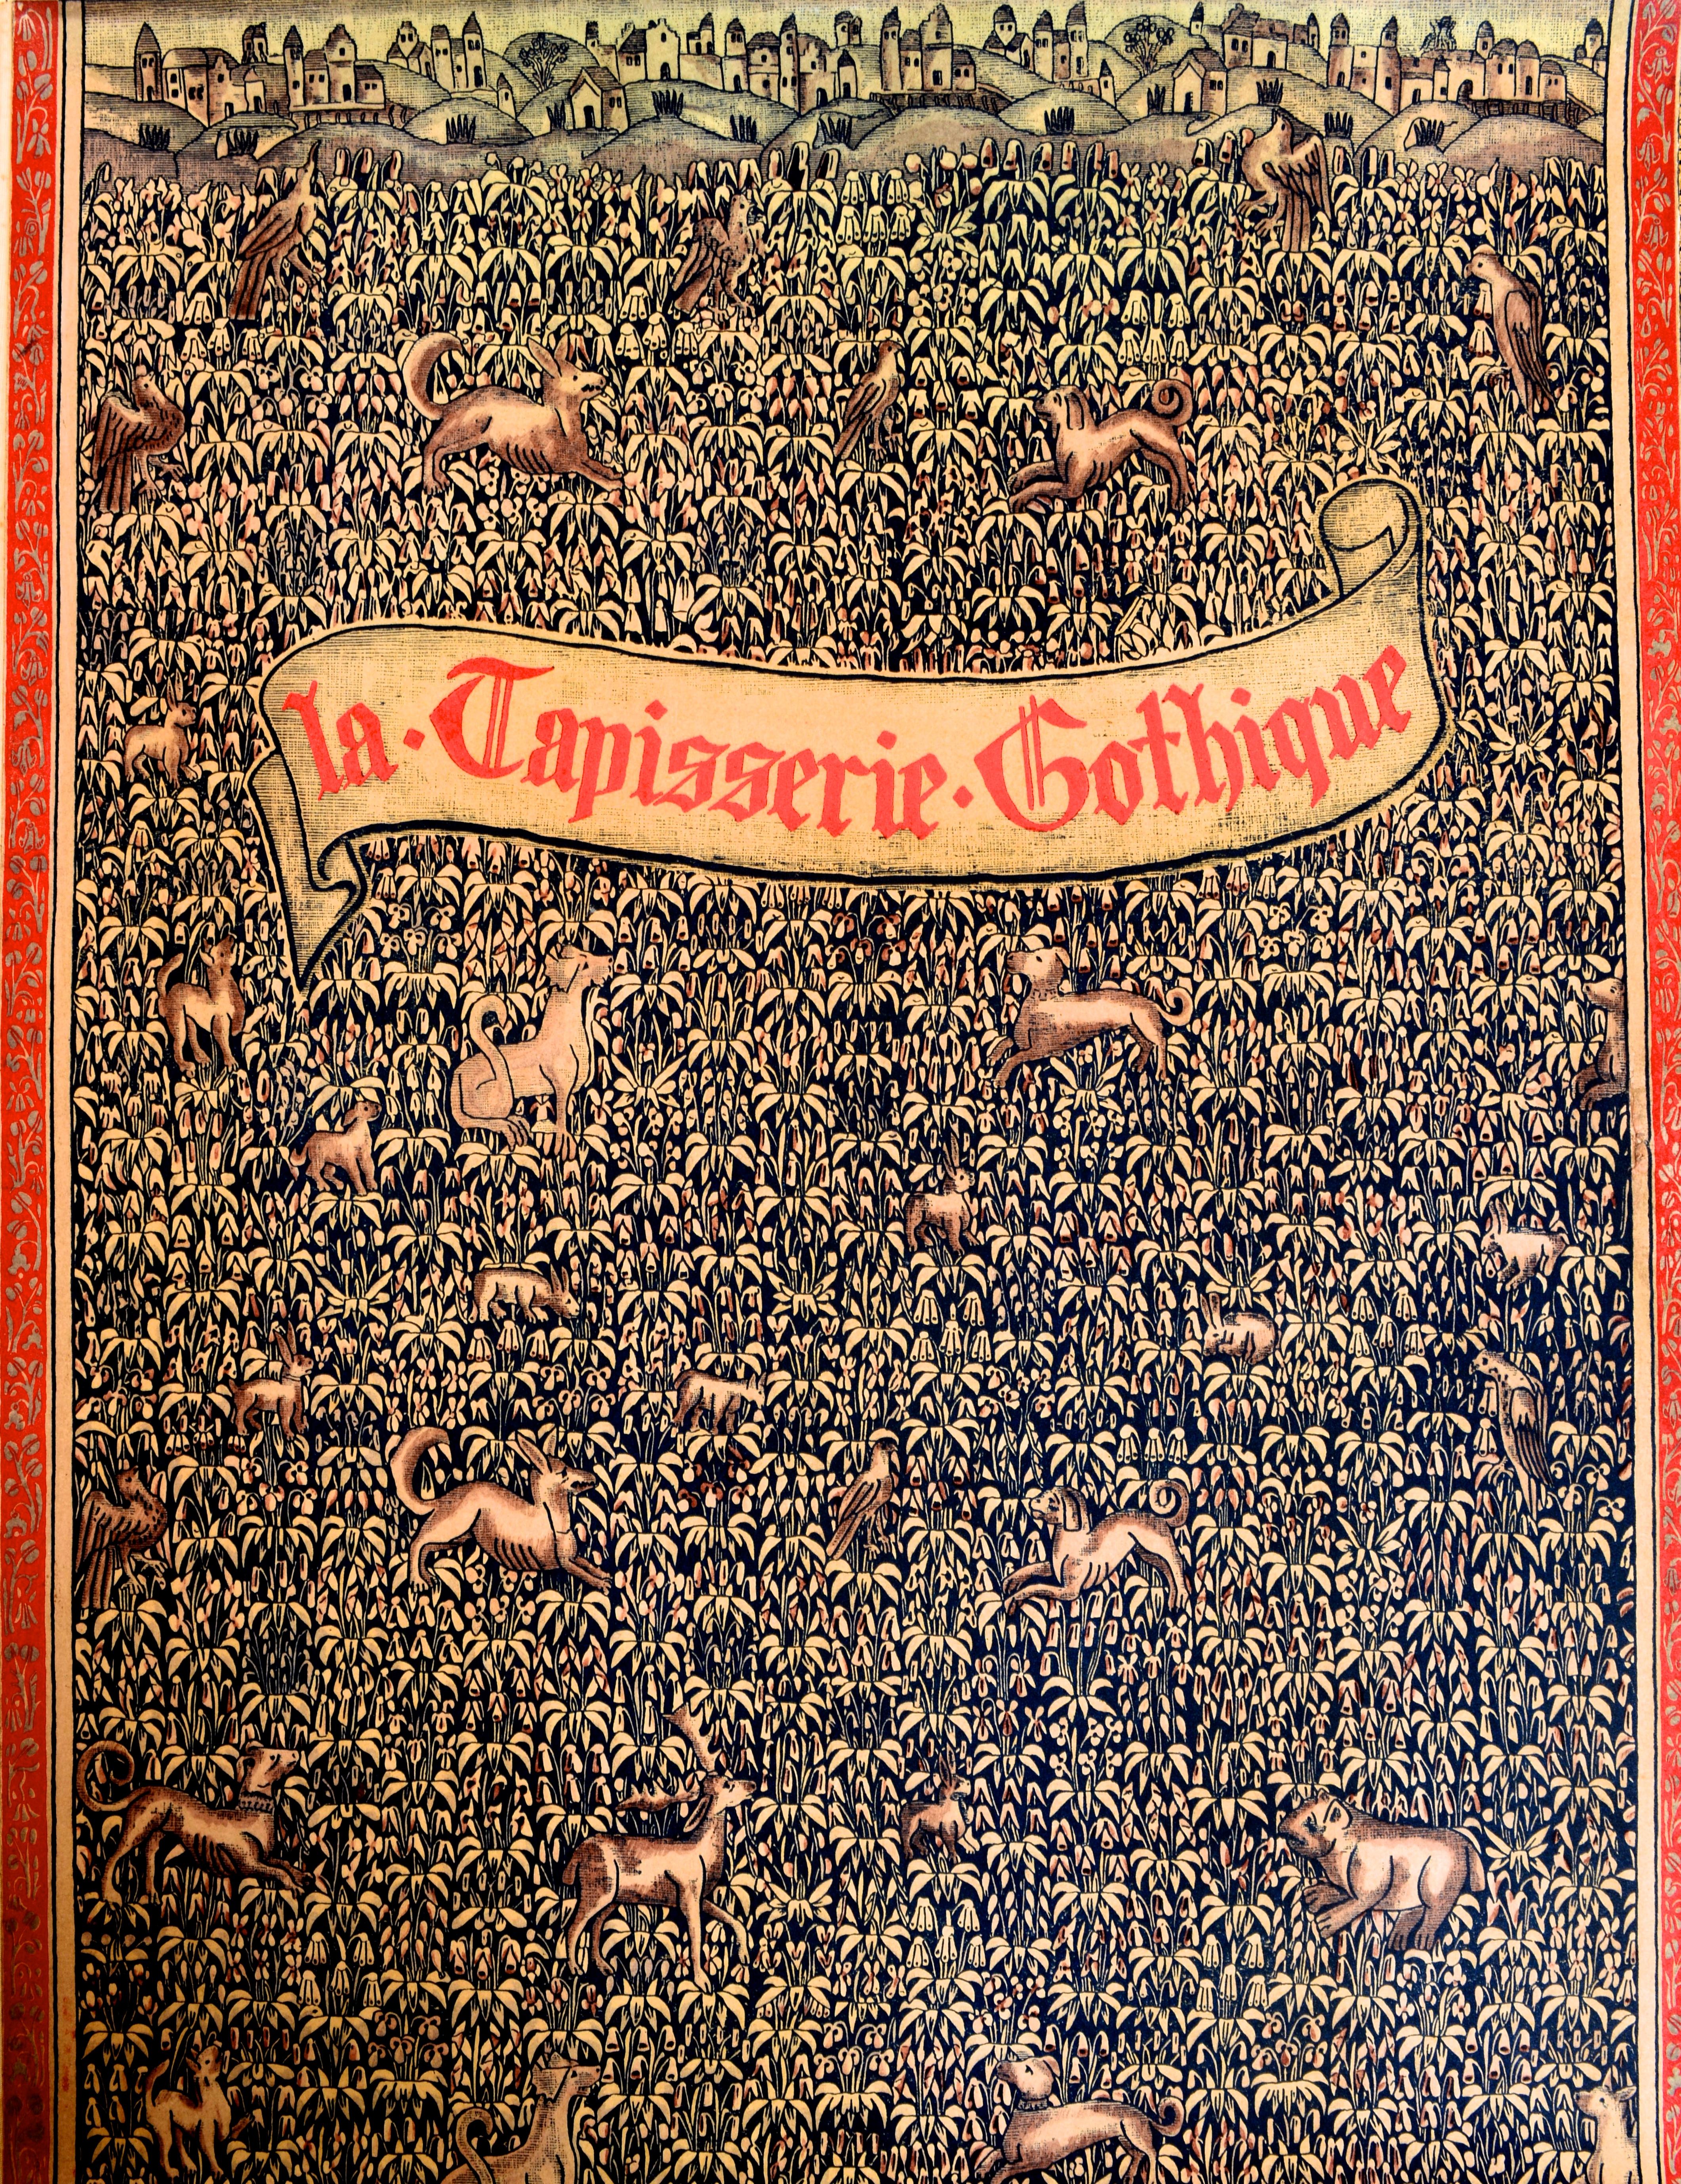 French La Tapisserie Gothique by Goeblins, 1st Ed, Leather Bound, Presentation Copy  For Sale